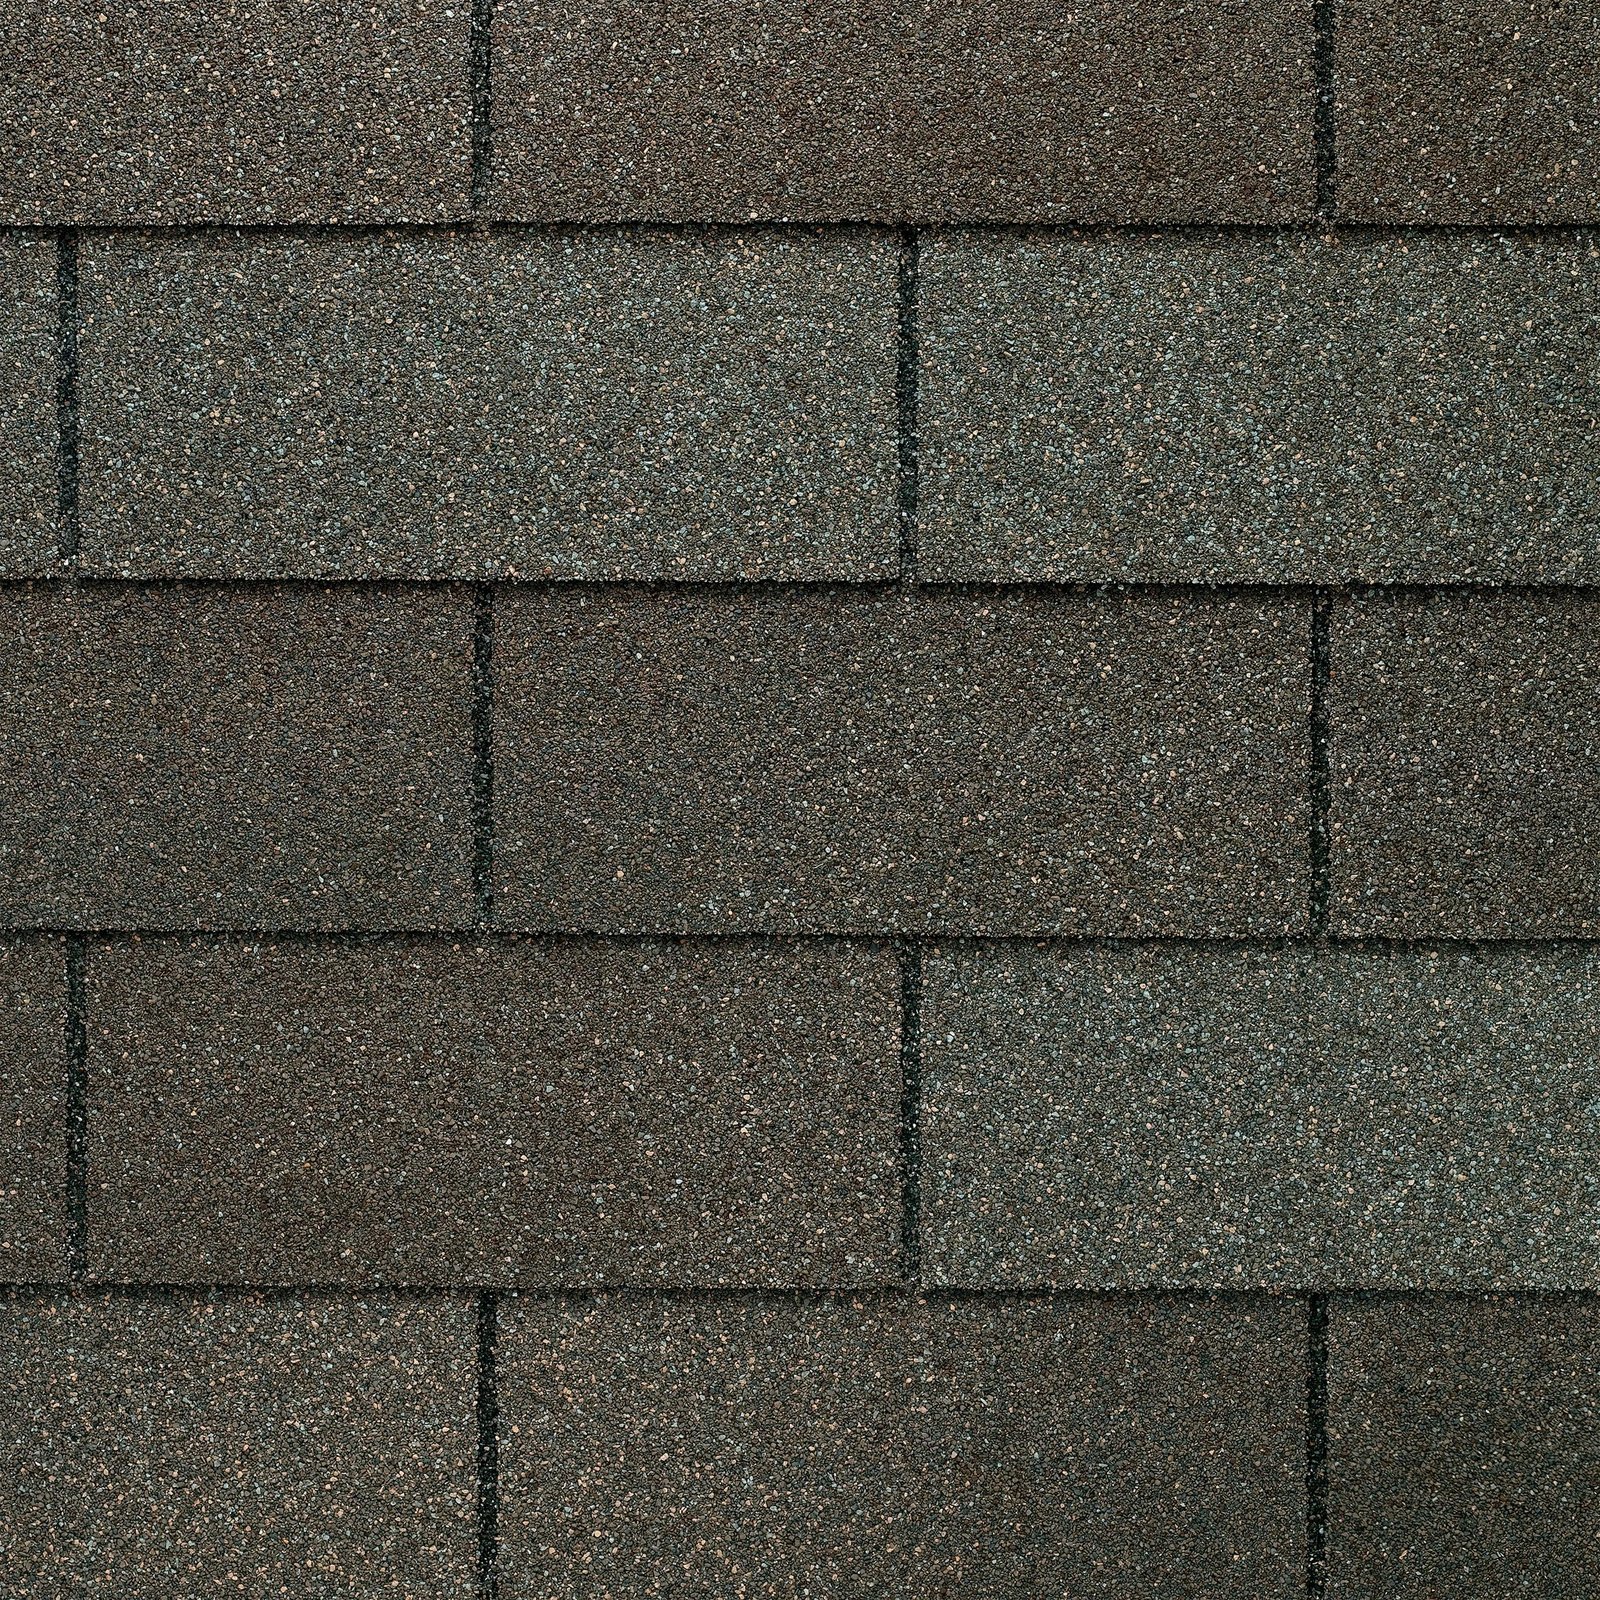 Close up photo of GAF's Royal Sovereign Weathered Gray shingle swatches